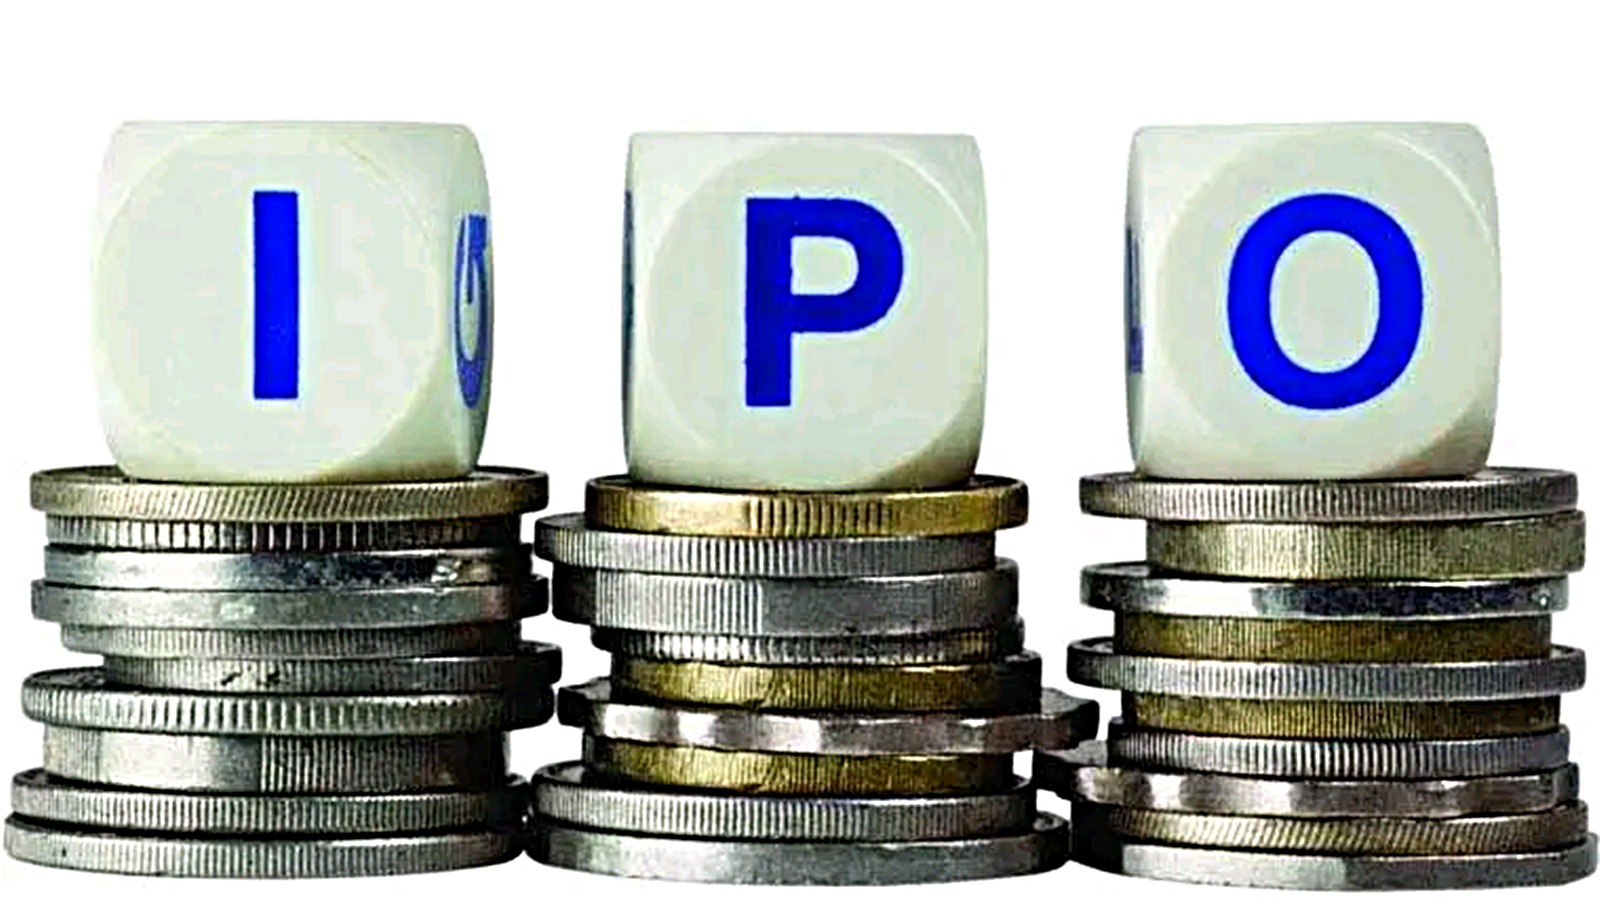 Initial Public Offering, equity capitalisation, ipos, SEBI, Indian express business, business news, business articles, business news stories